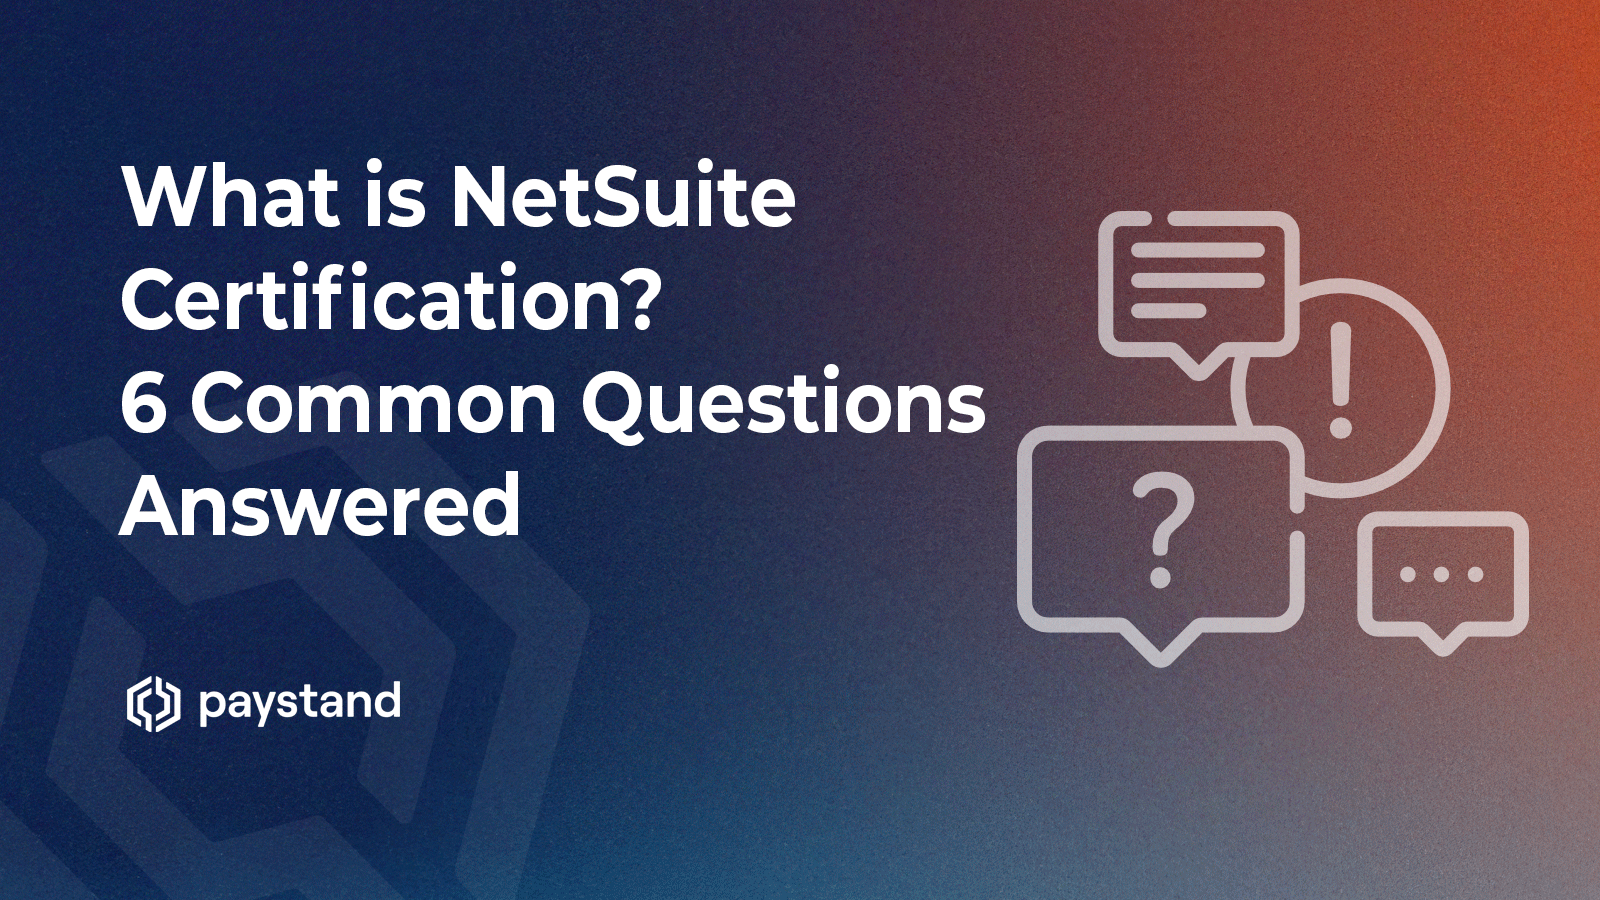 What is NetSuite Certification? 6 Common Questions Answered